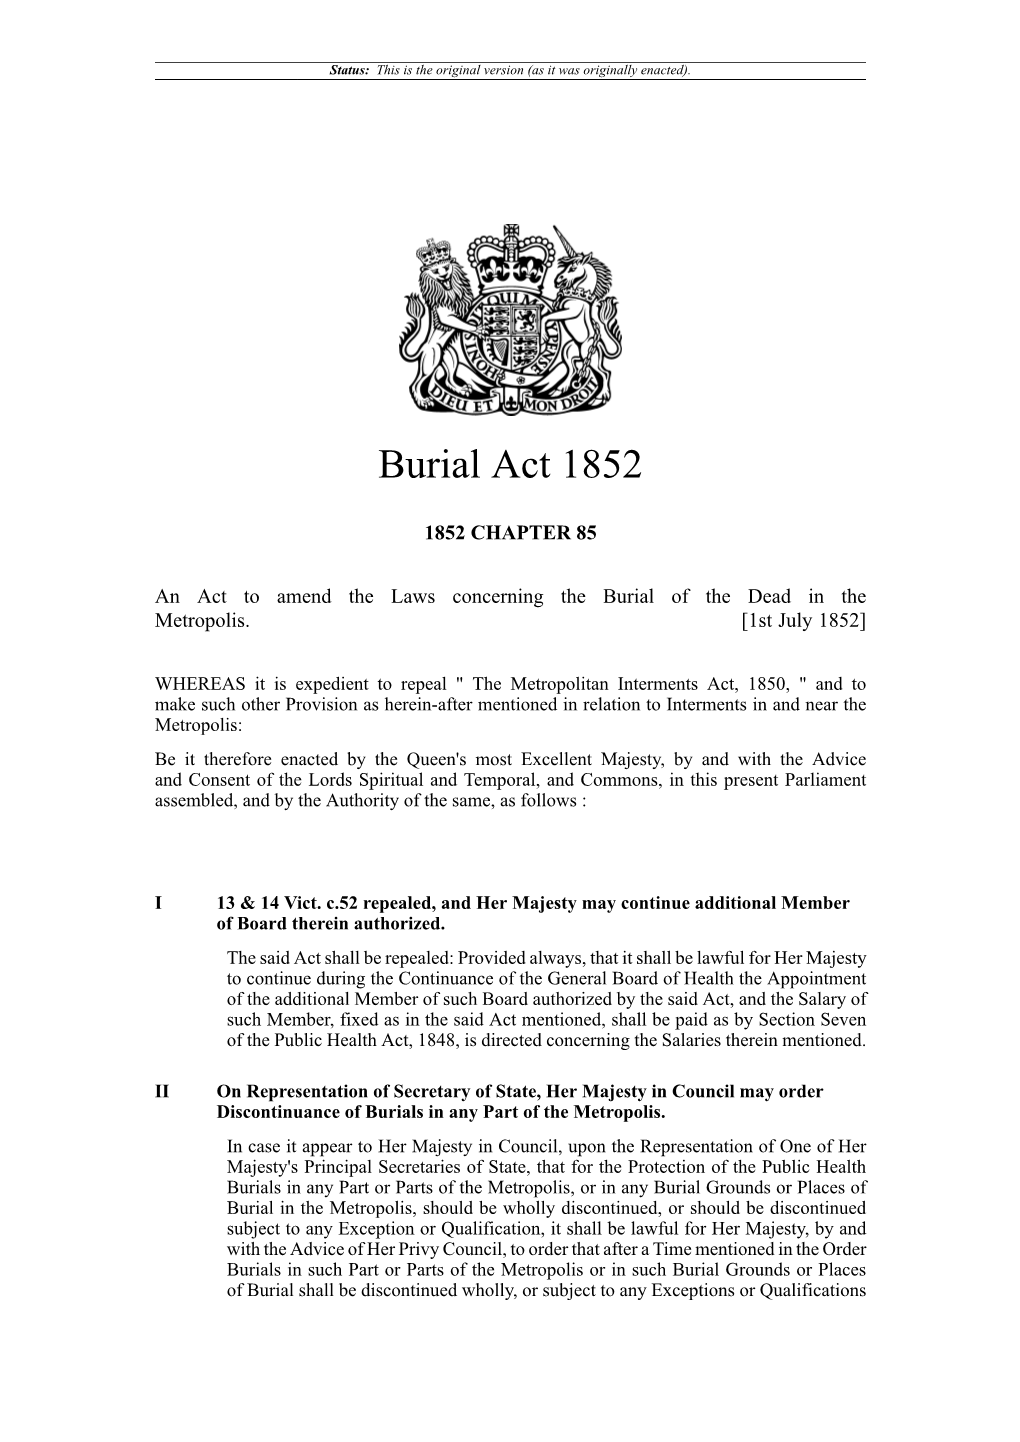 Burial Act 1852